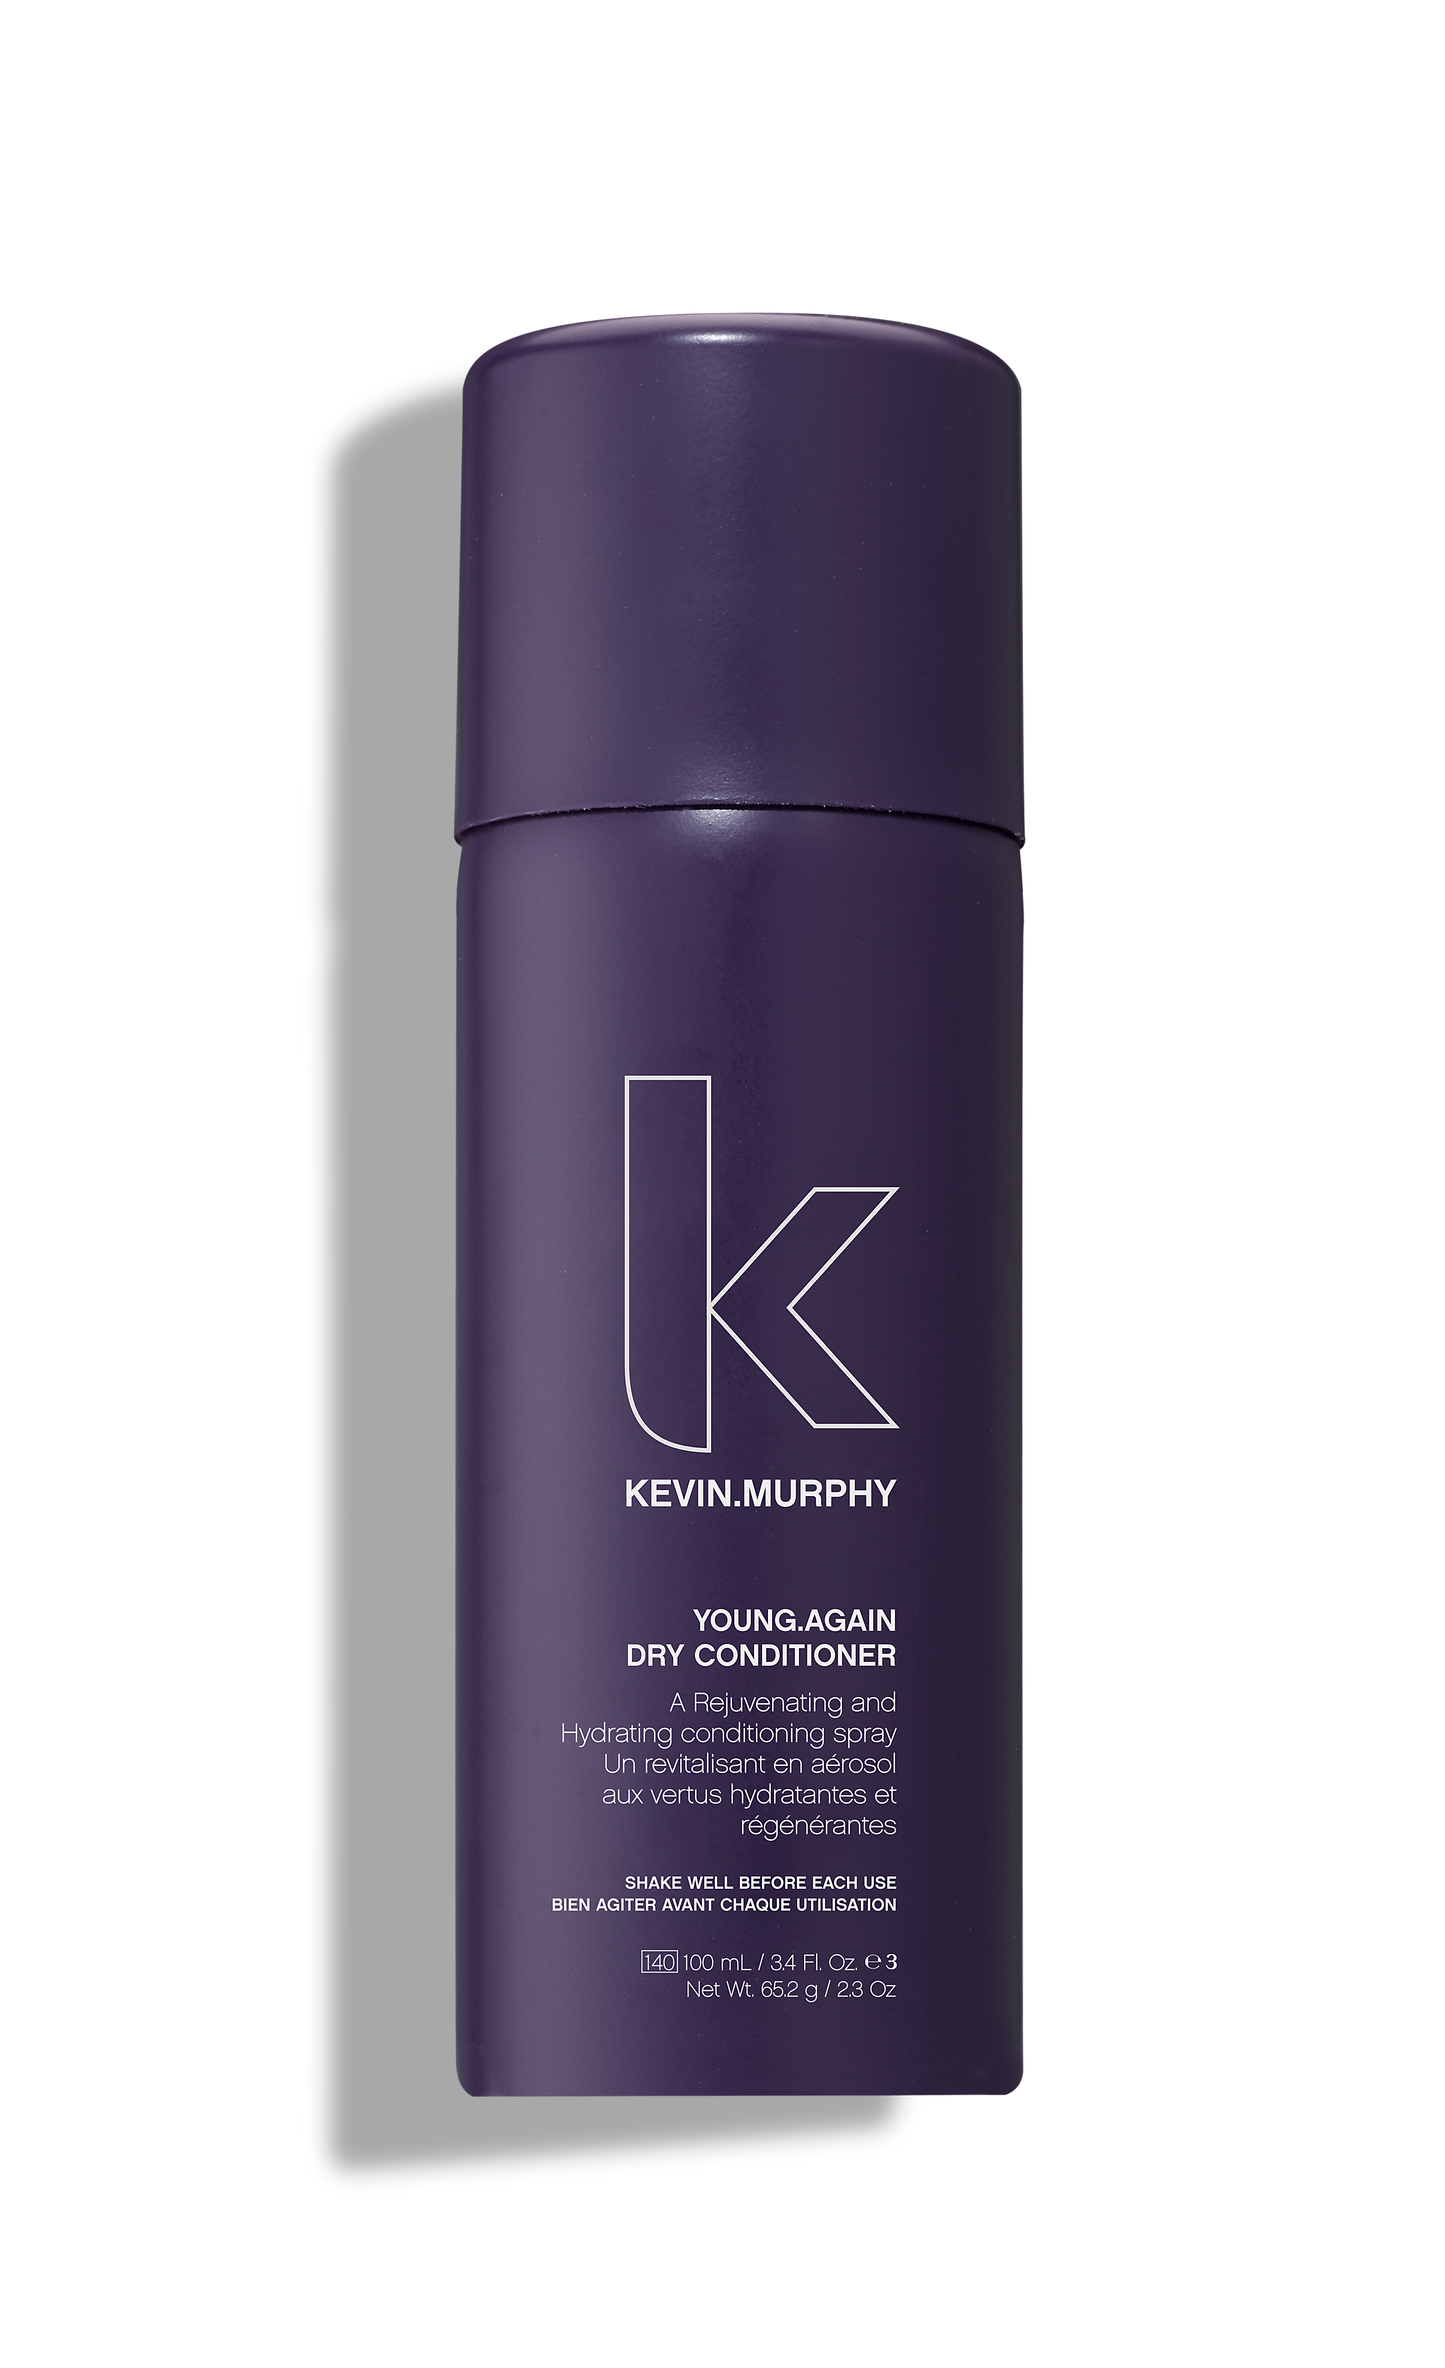 KEVIN.MURPHY Young Again Dry Conditioner